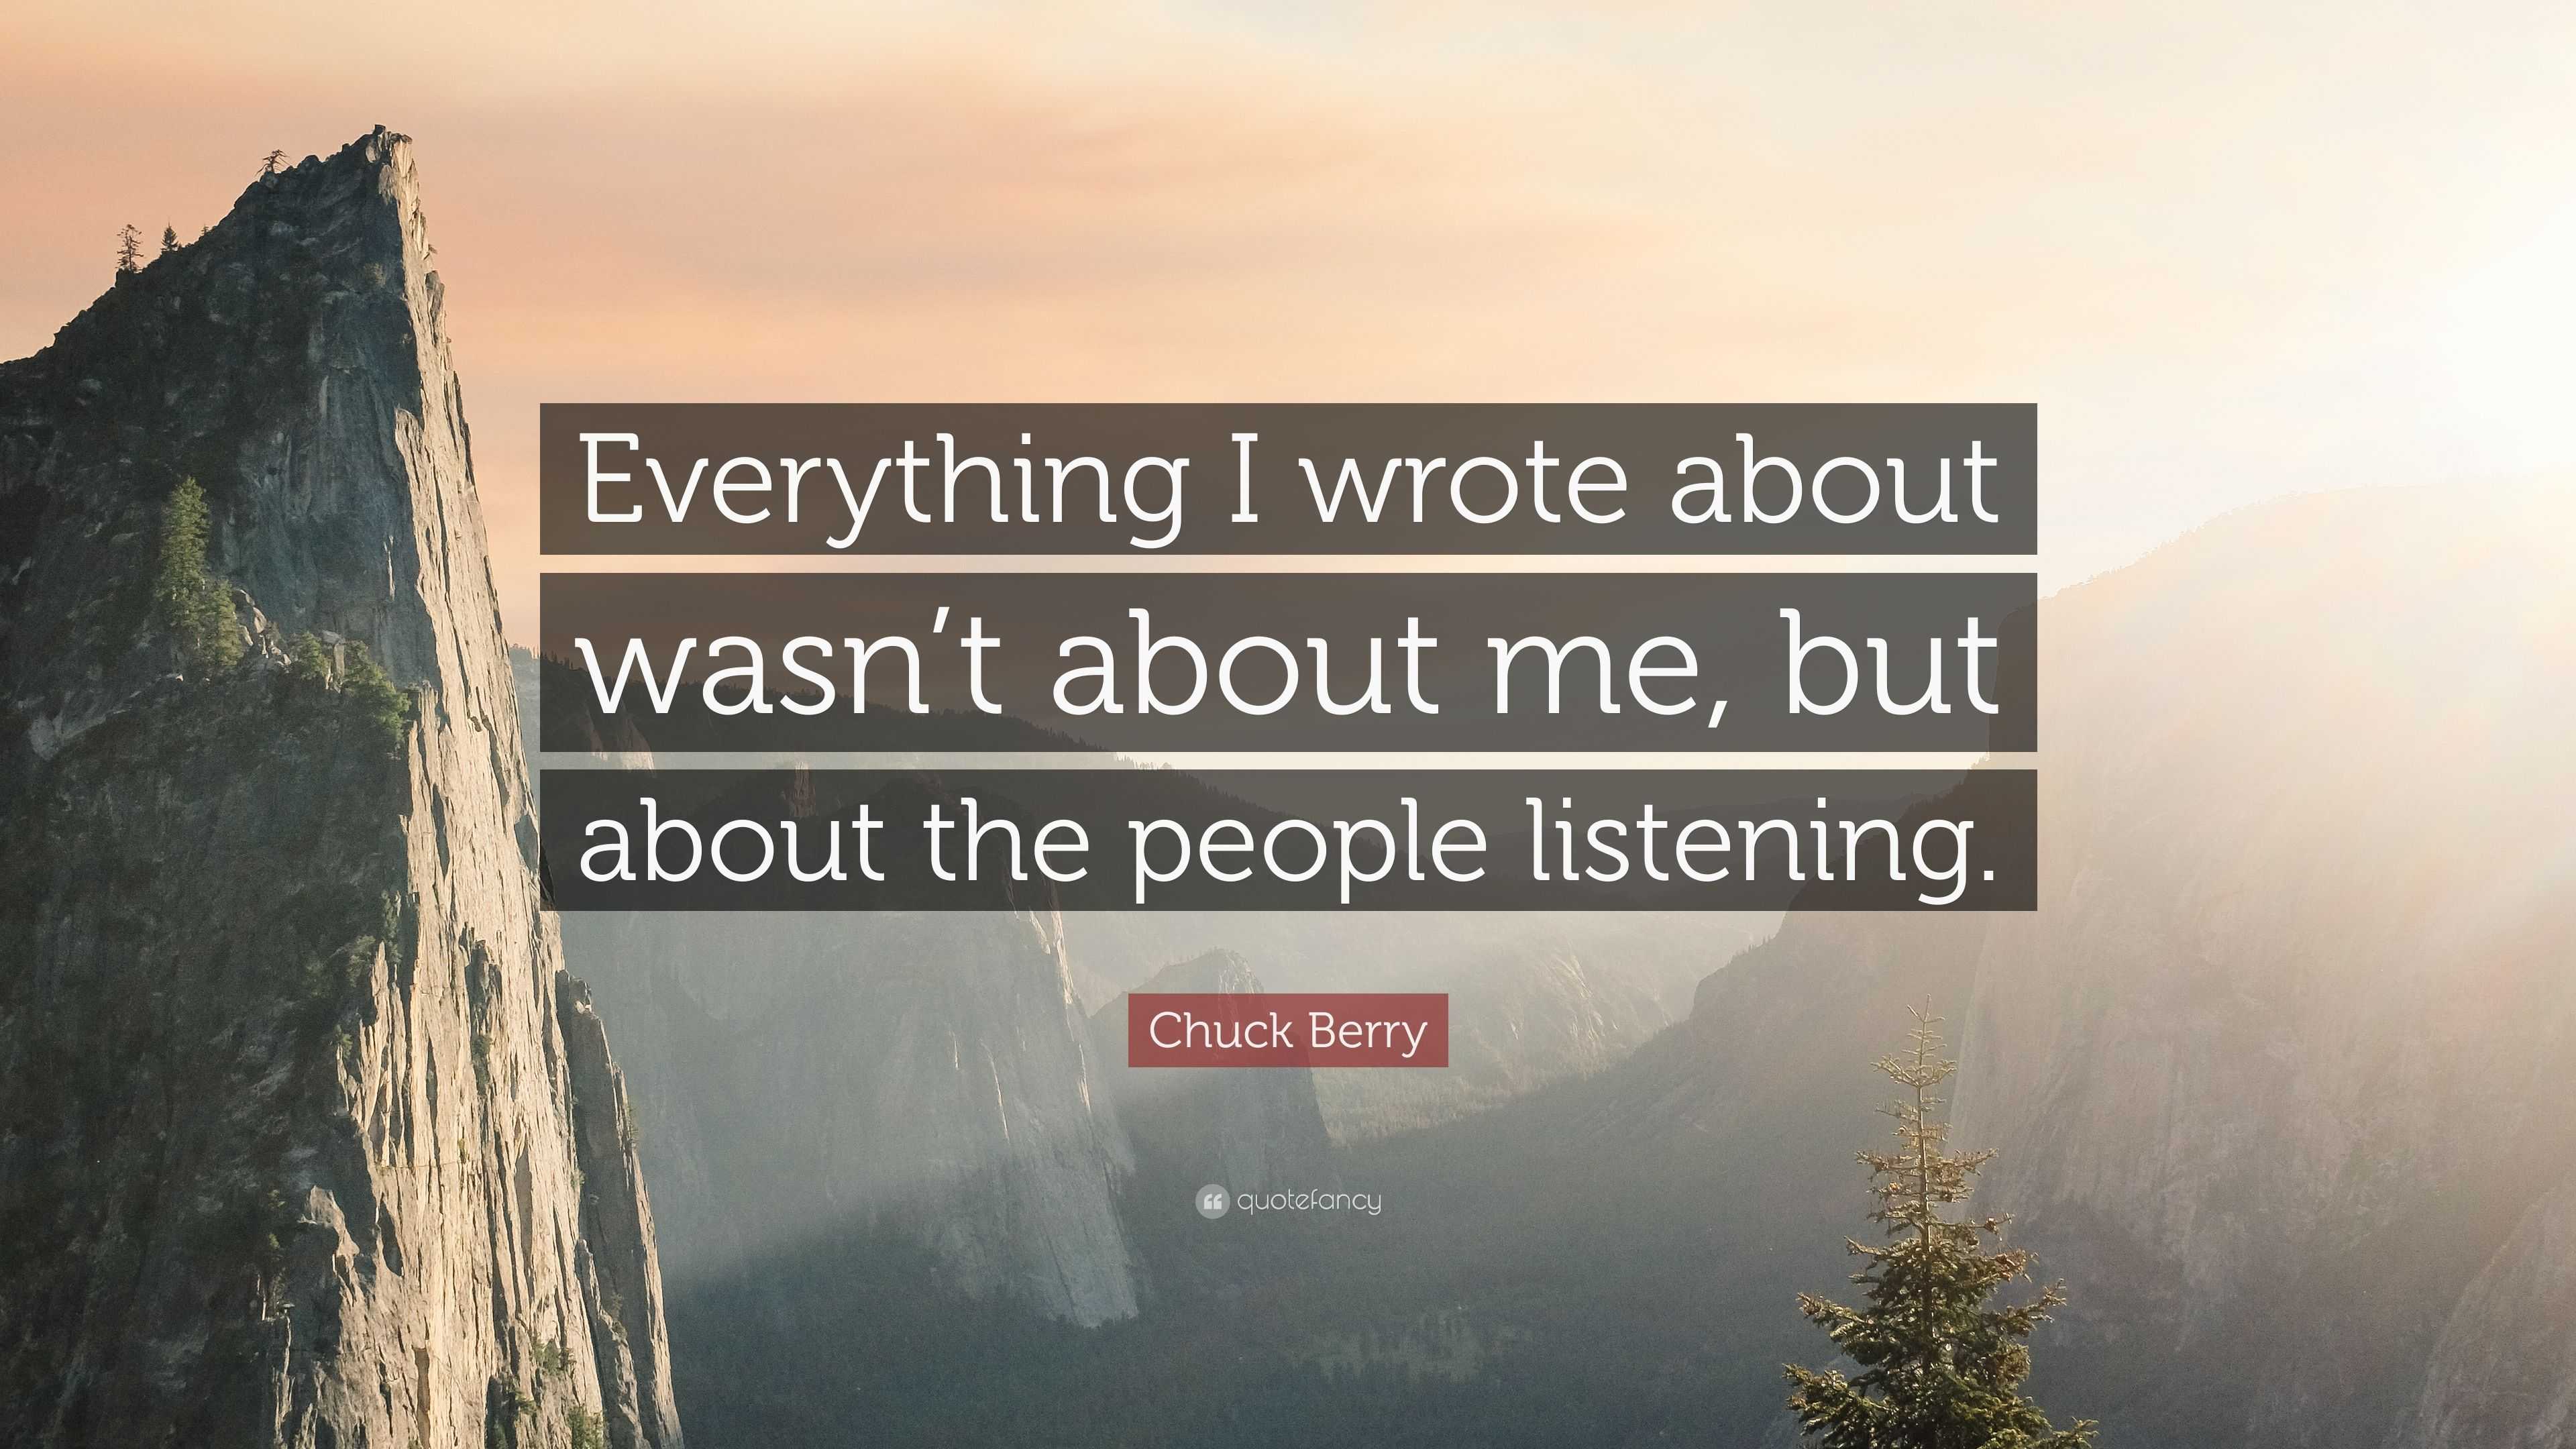 Chuck Berry Quote: “Everything I wrote about wasn’t about me, but about ...